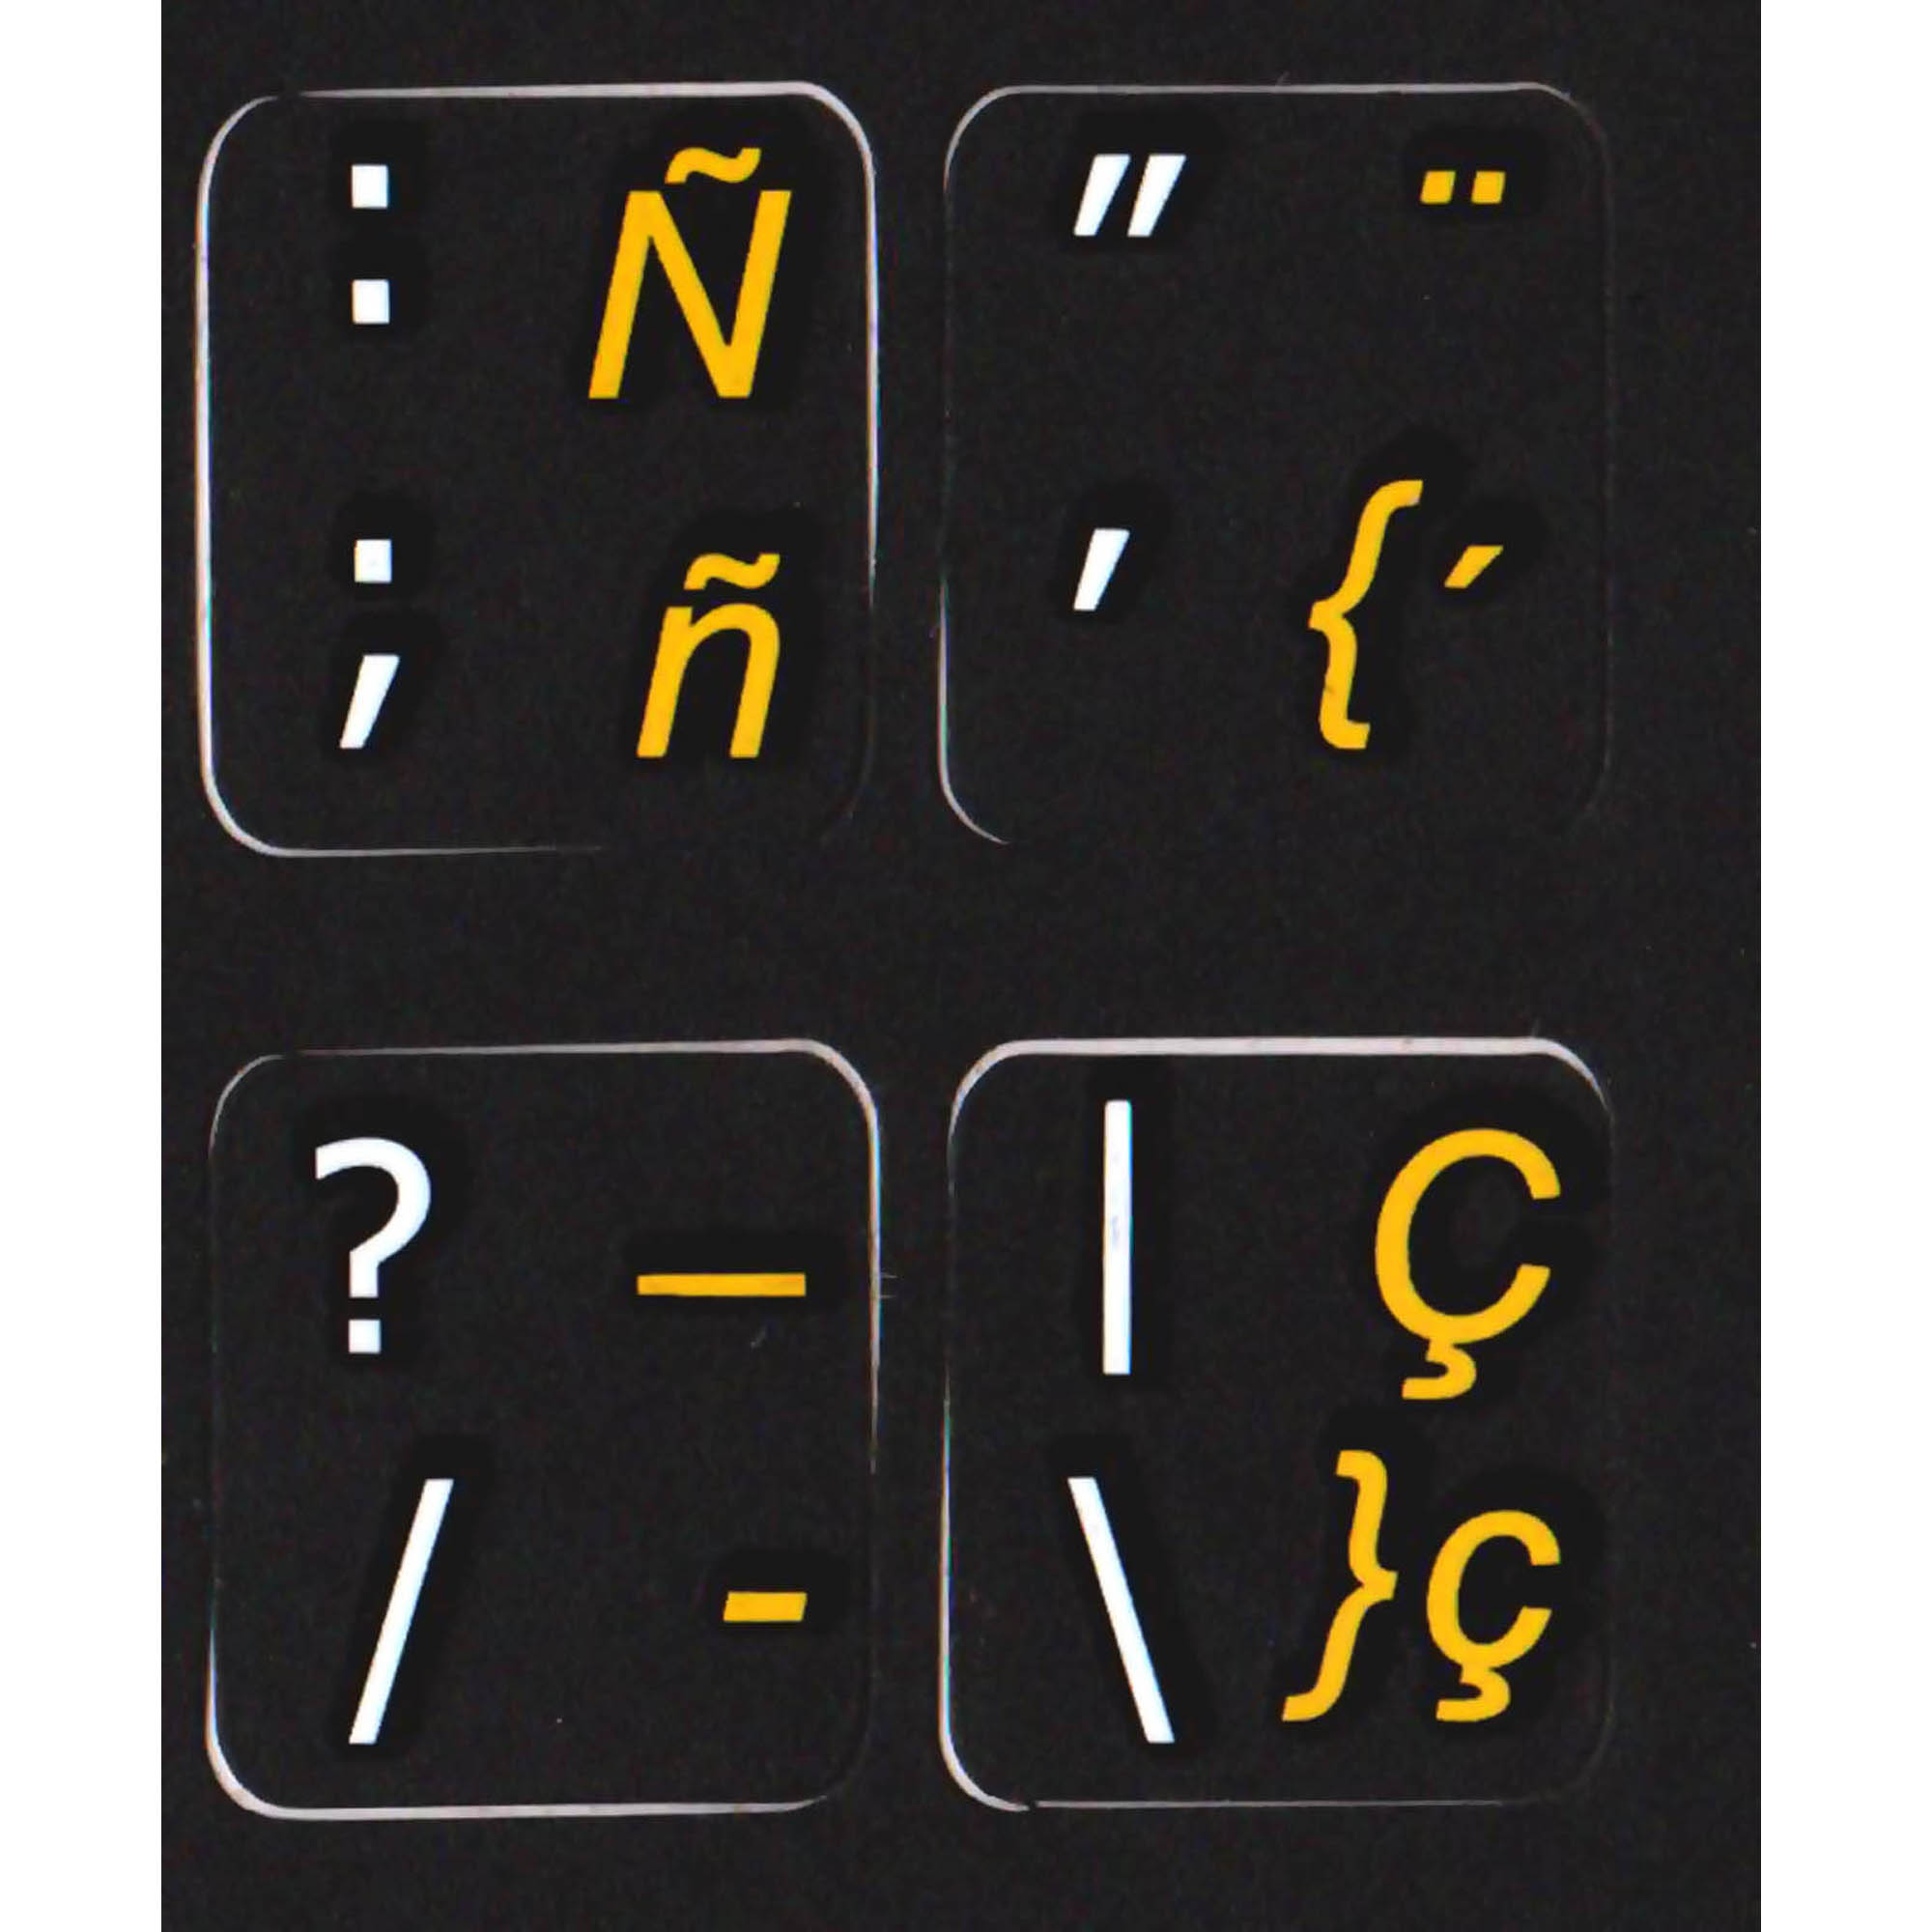 Spanish traditional - English keyboard labels black buy here